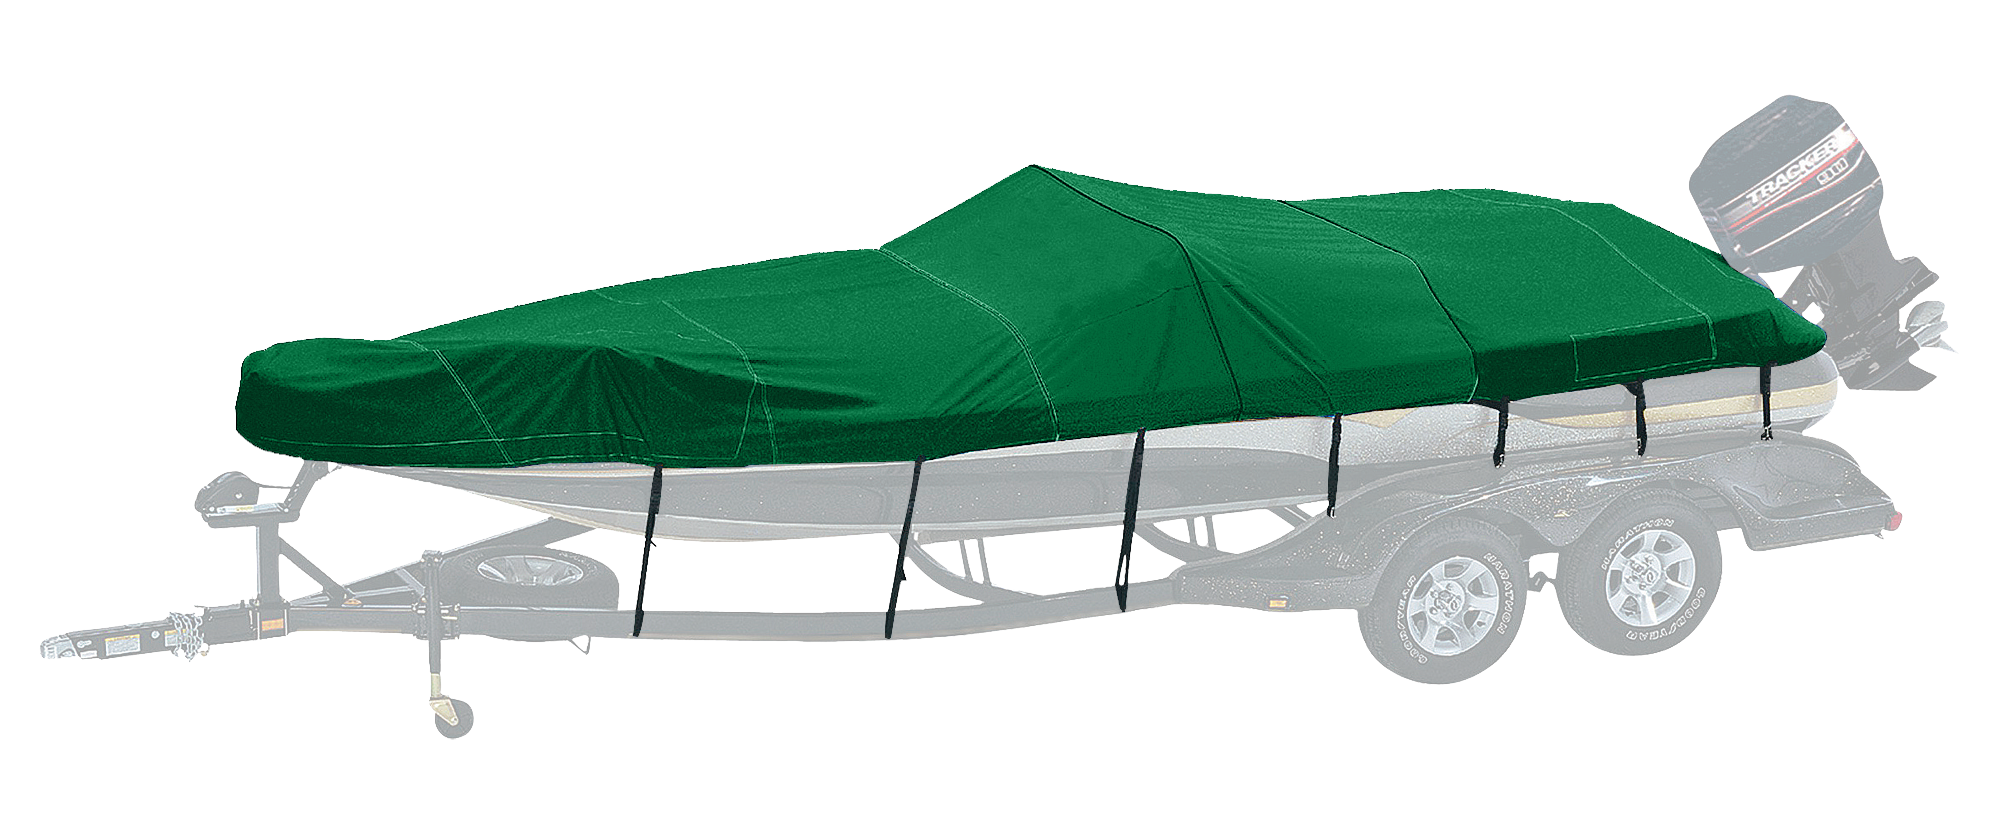 Bass Pro Shops Exact Fit Boat Cover by Westland - Tahoe - '04-'05 254 DB Standard I/O w/Ext. - Forest Green